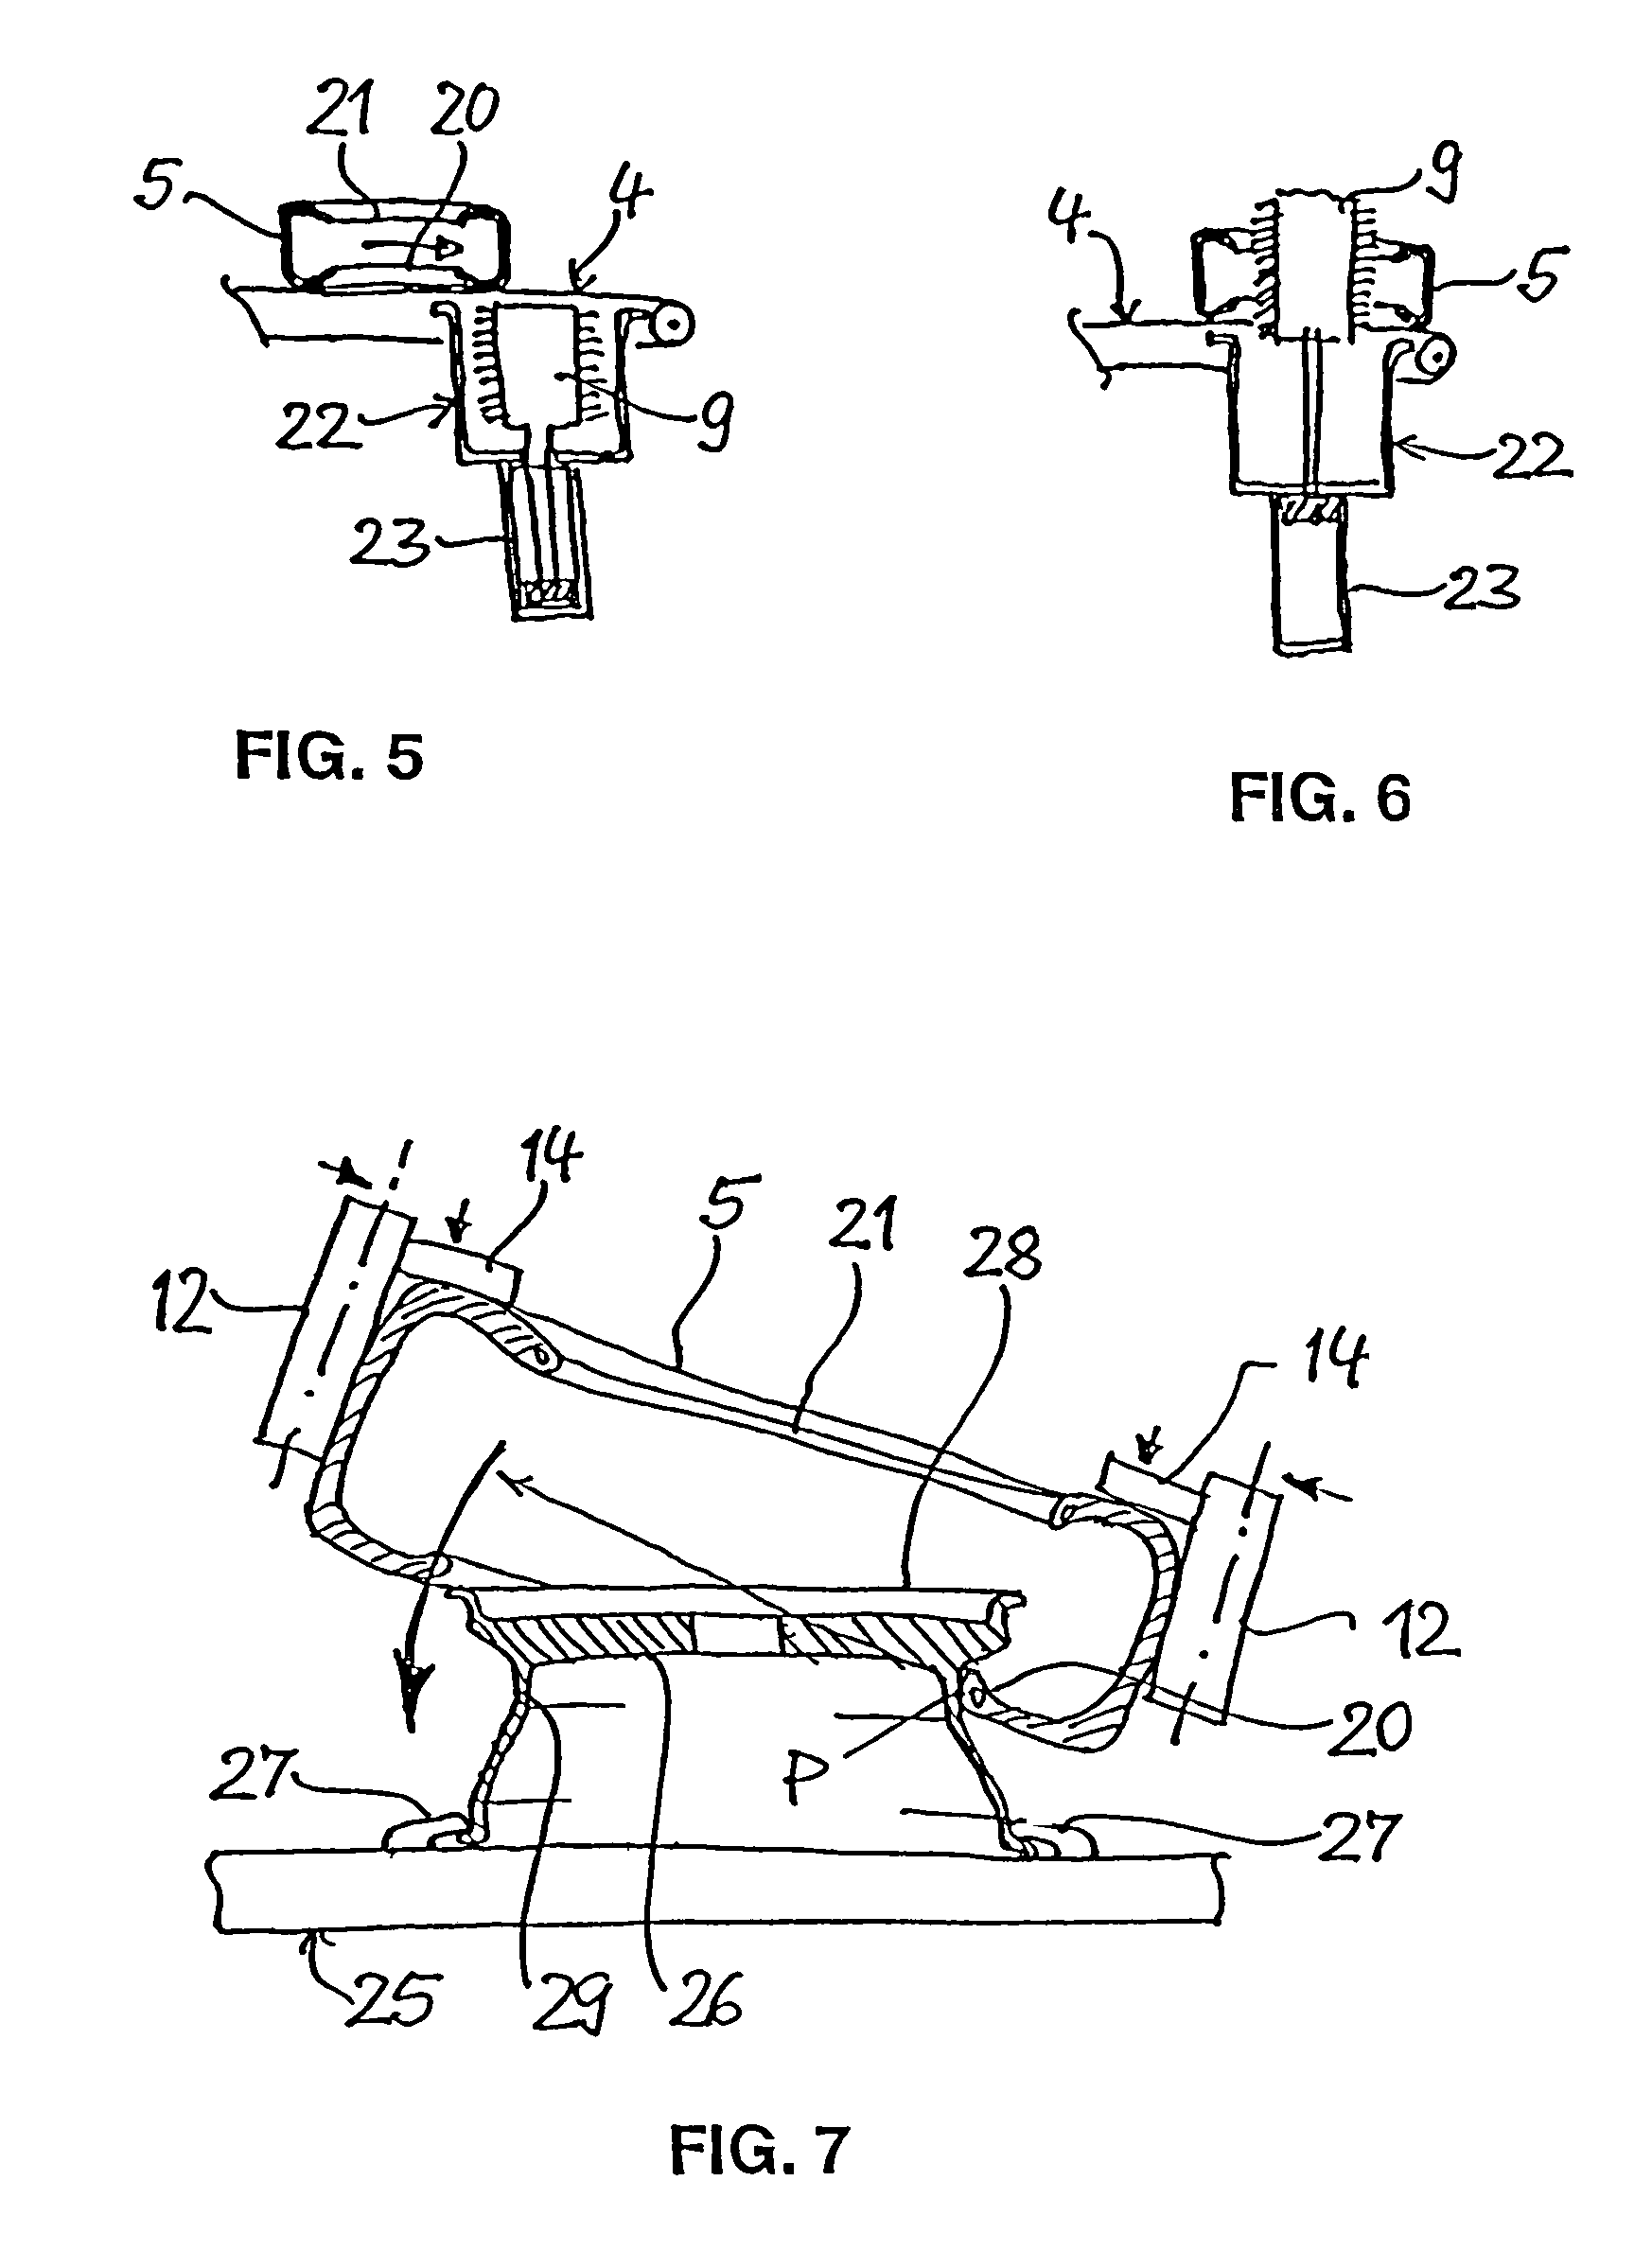 Method for mounting a pneumatic tire